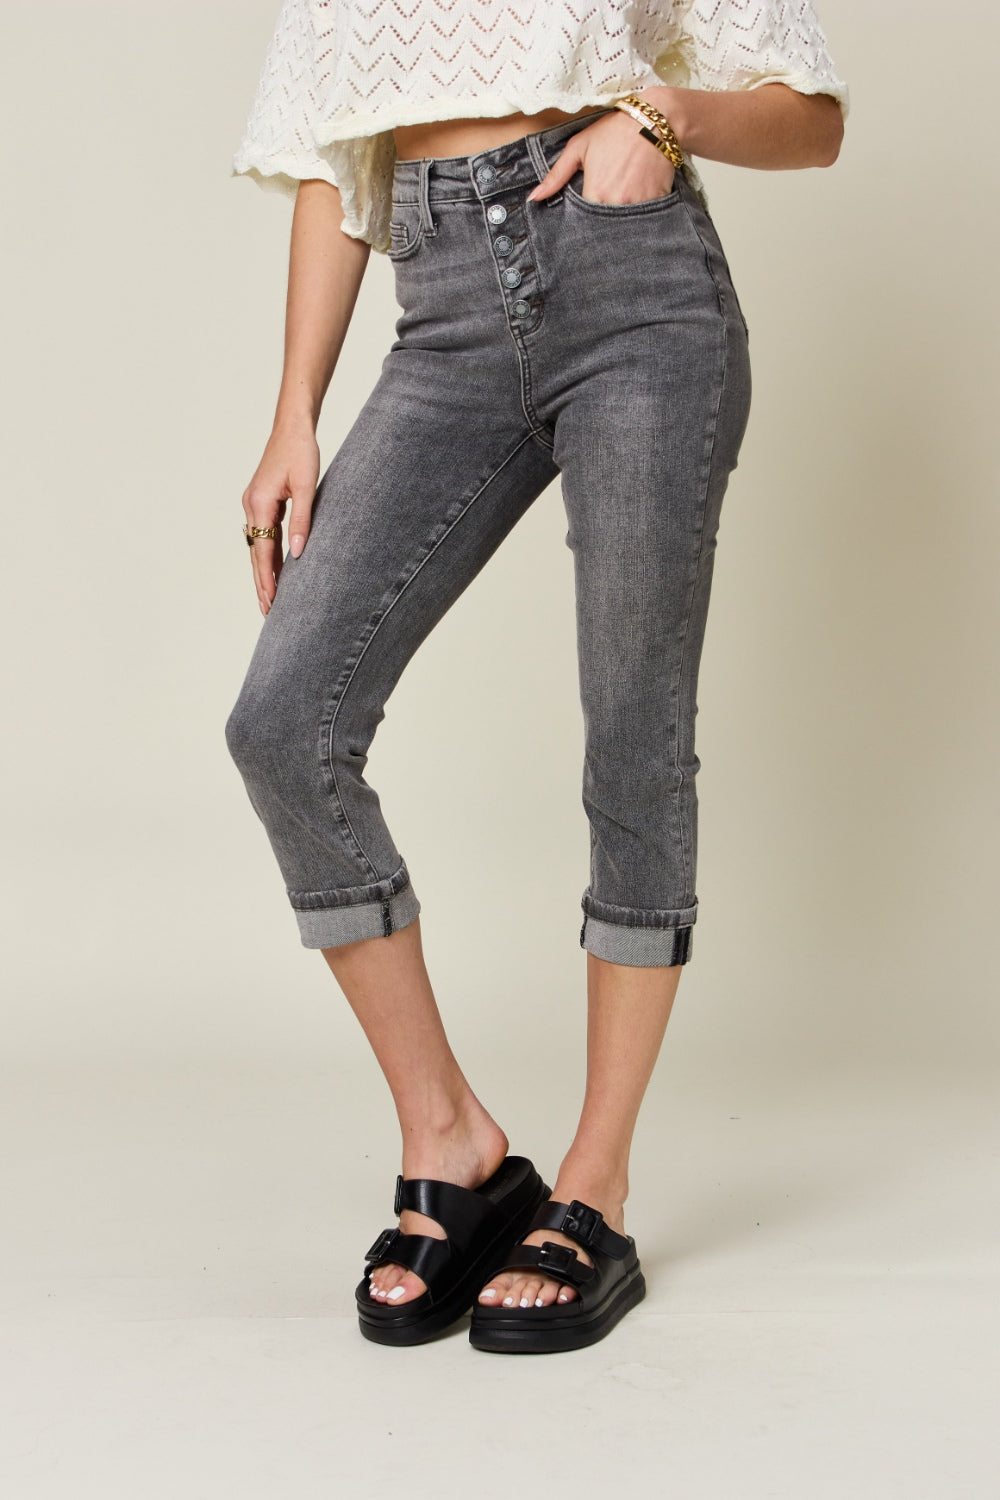 Elevate your wardrobe with Judy Blue's High Waist Cuffed Capris featuring a chic button fly and stretch comfort for all-day wear.